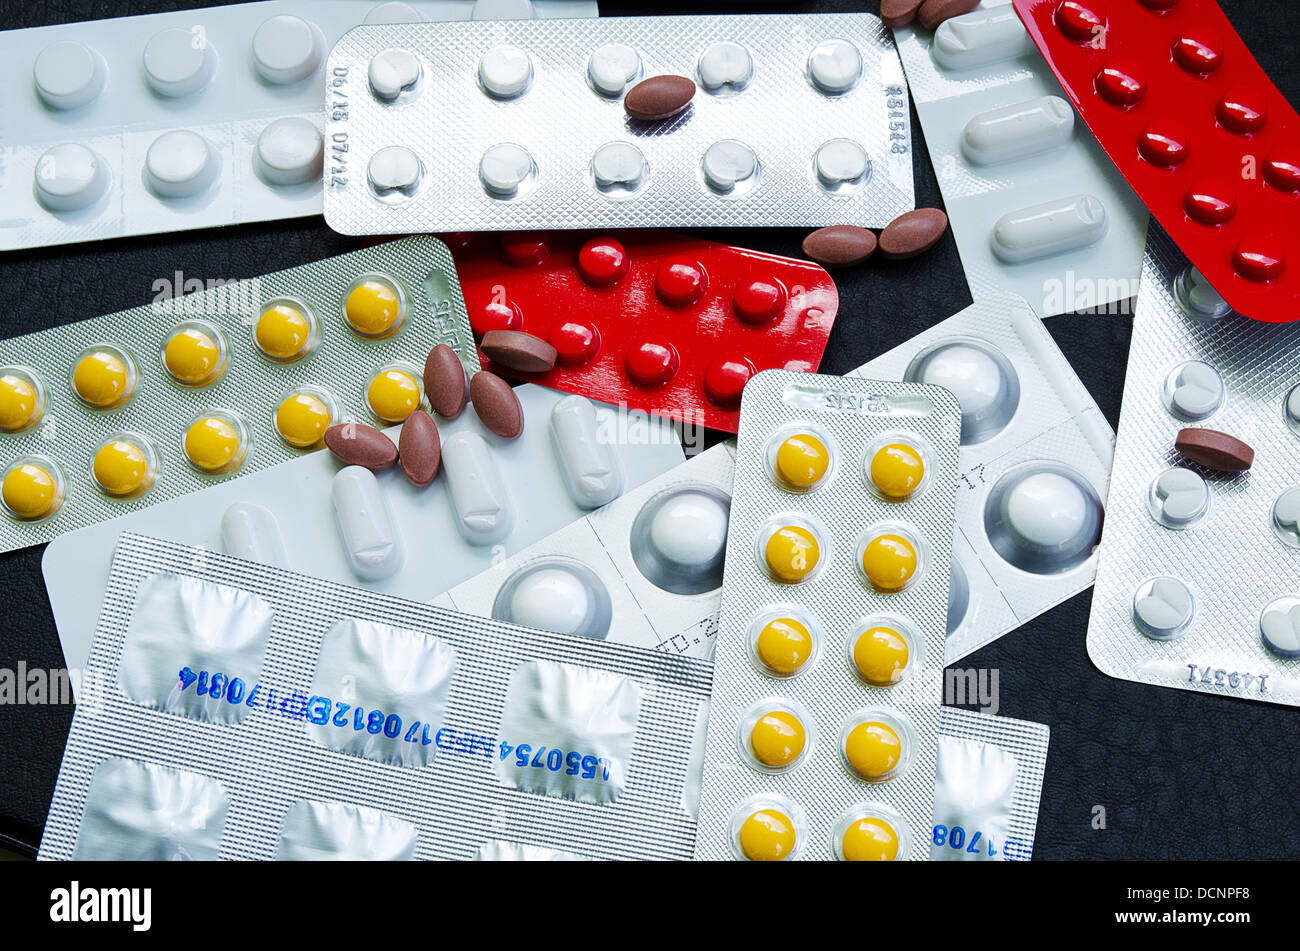 Medicine Drugs Pharmacy is the first aid to get better. Stock Photo